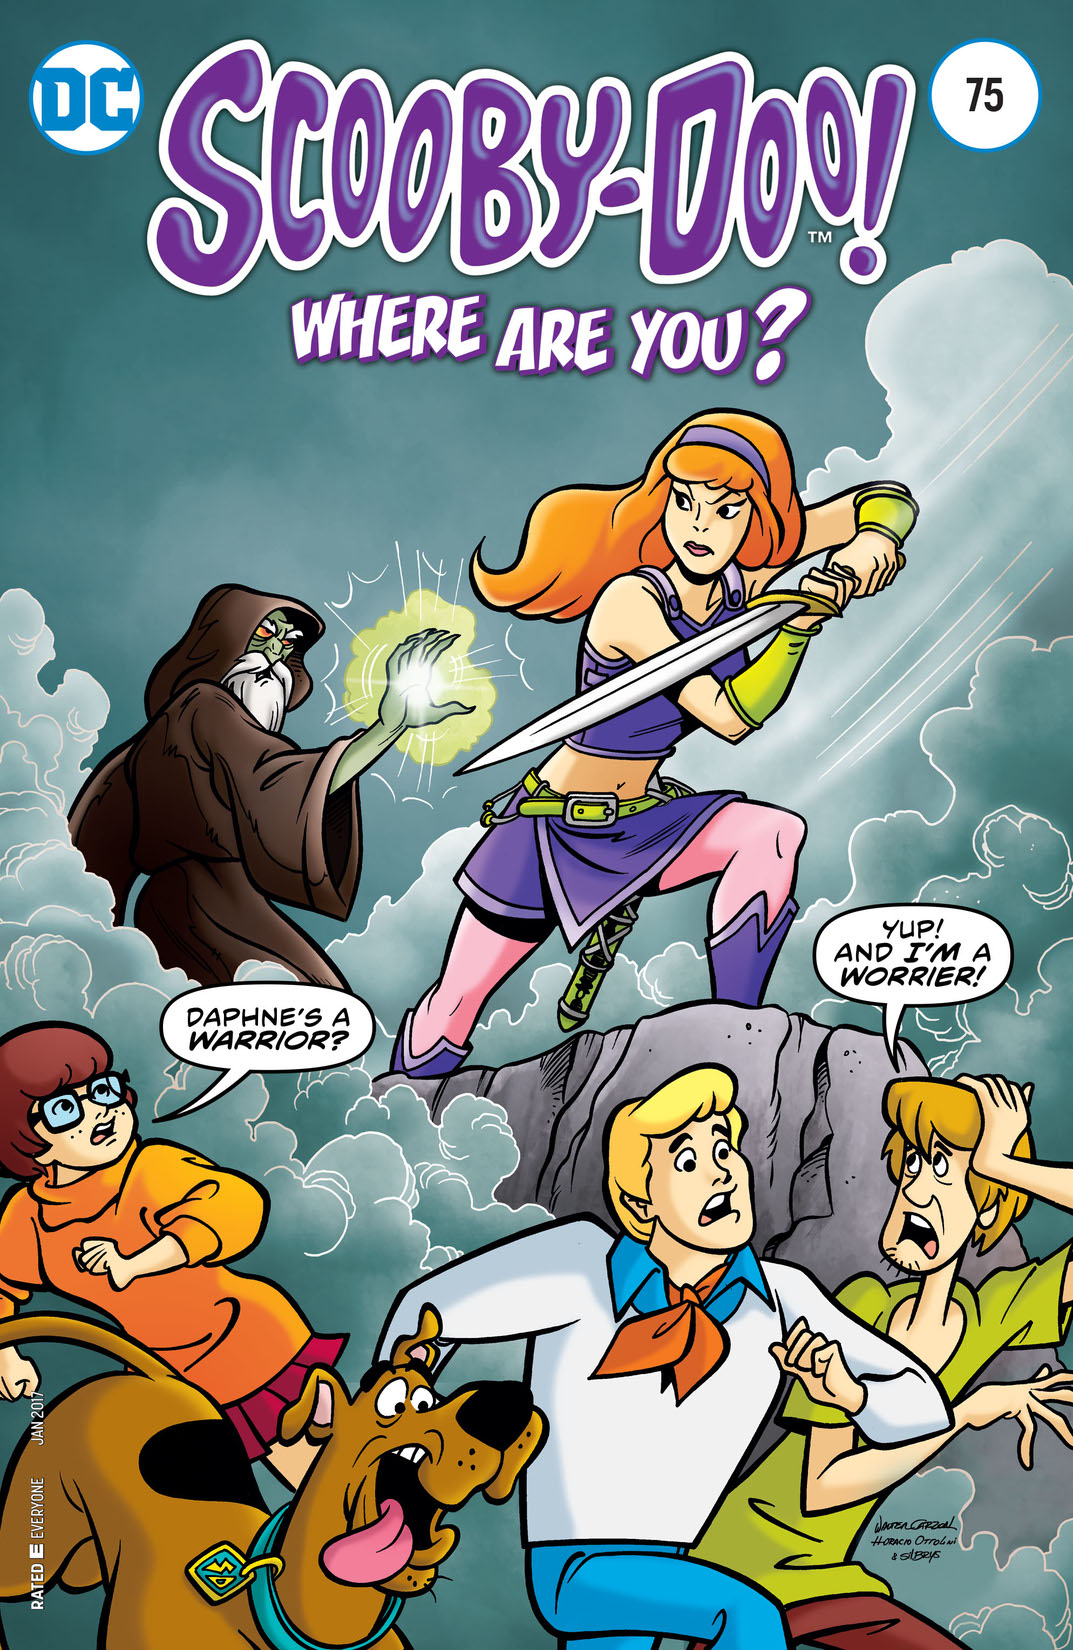 Scooby-Doo, Where Are You? #75 preview images